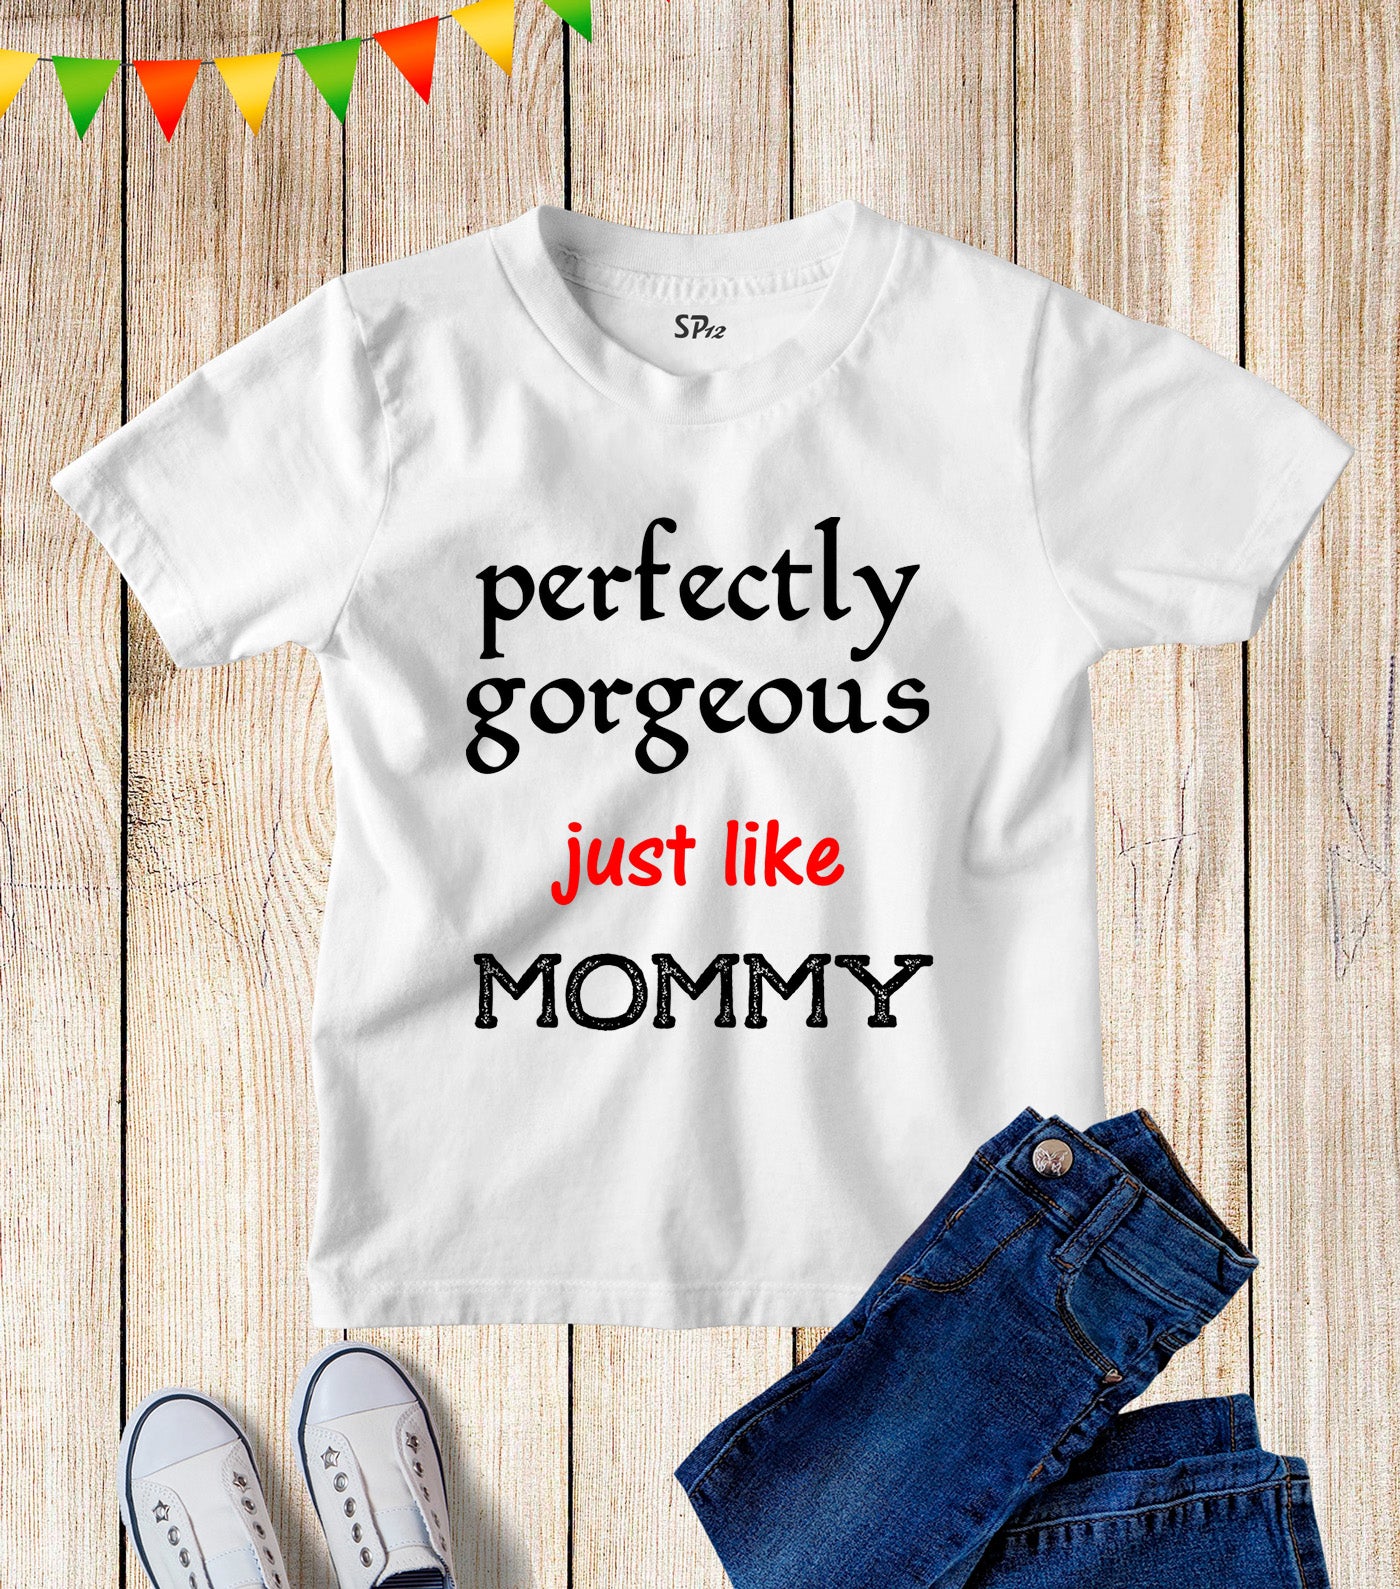 Perfectly Gorgeous Just like Mommy Kids T Shirt